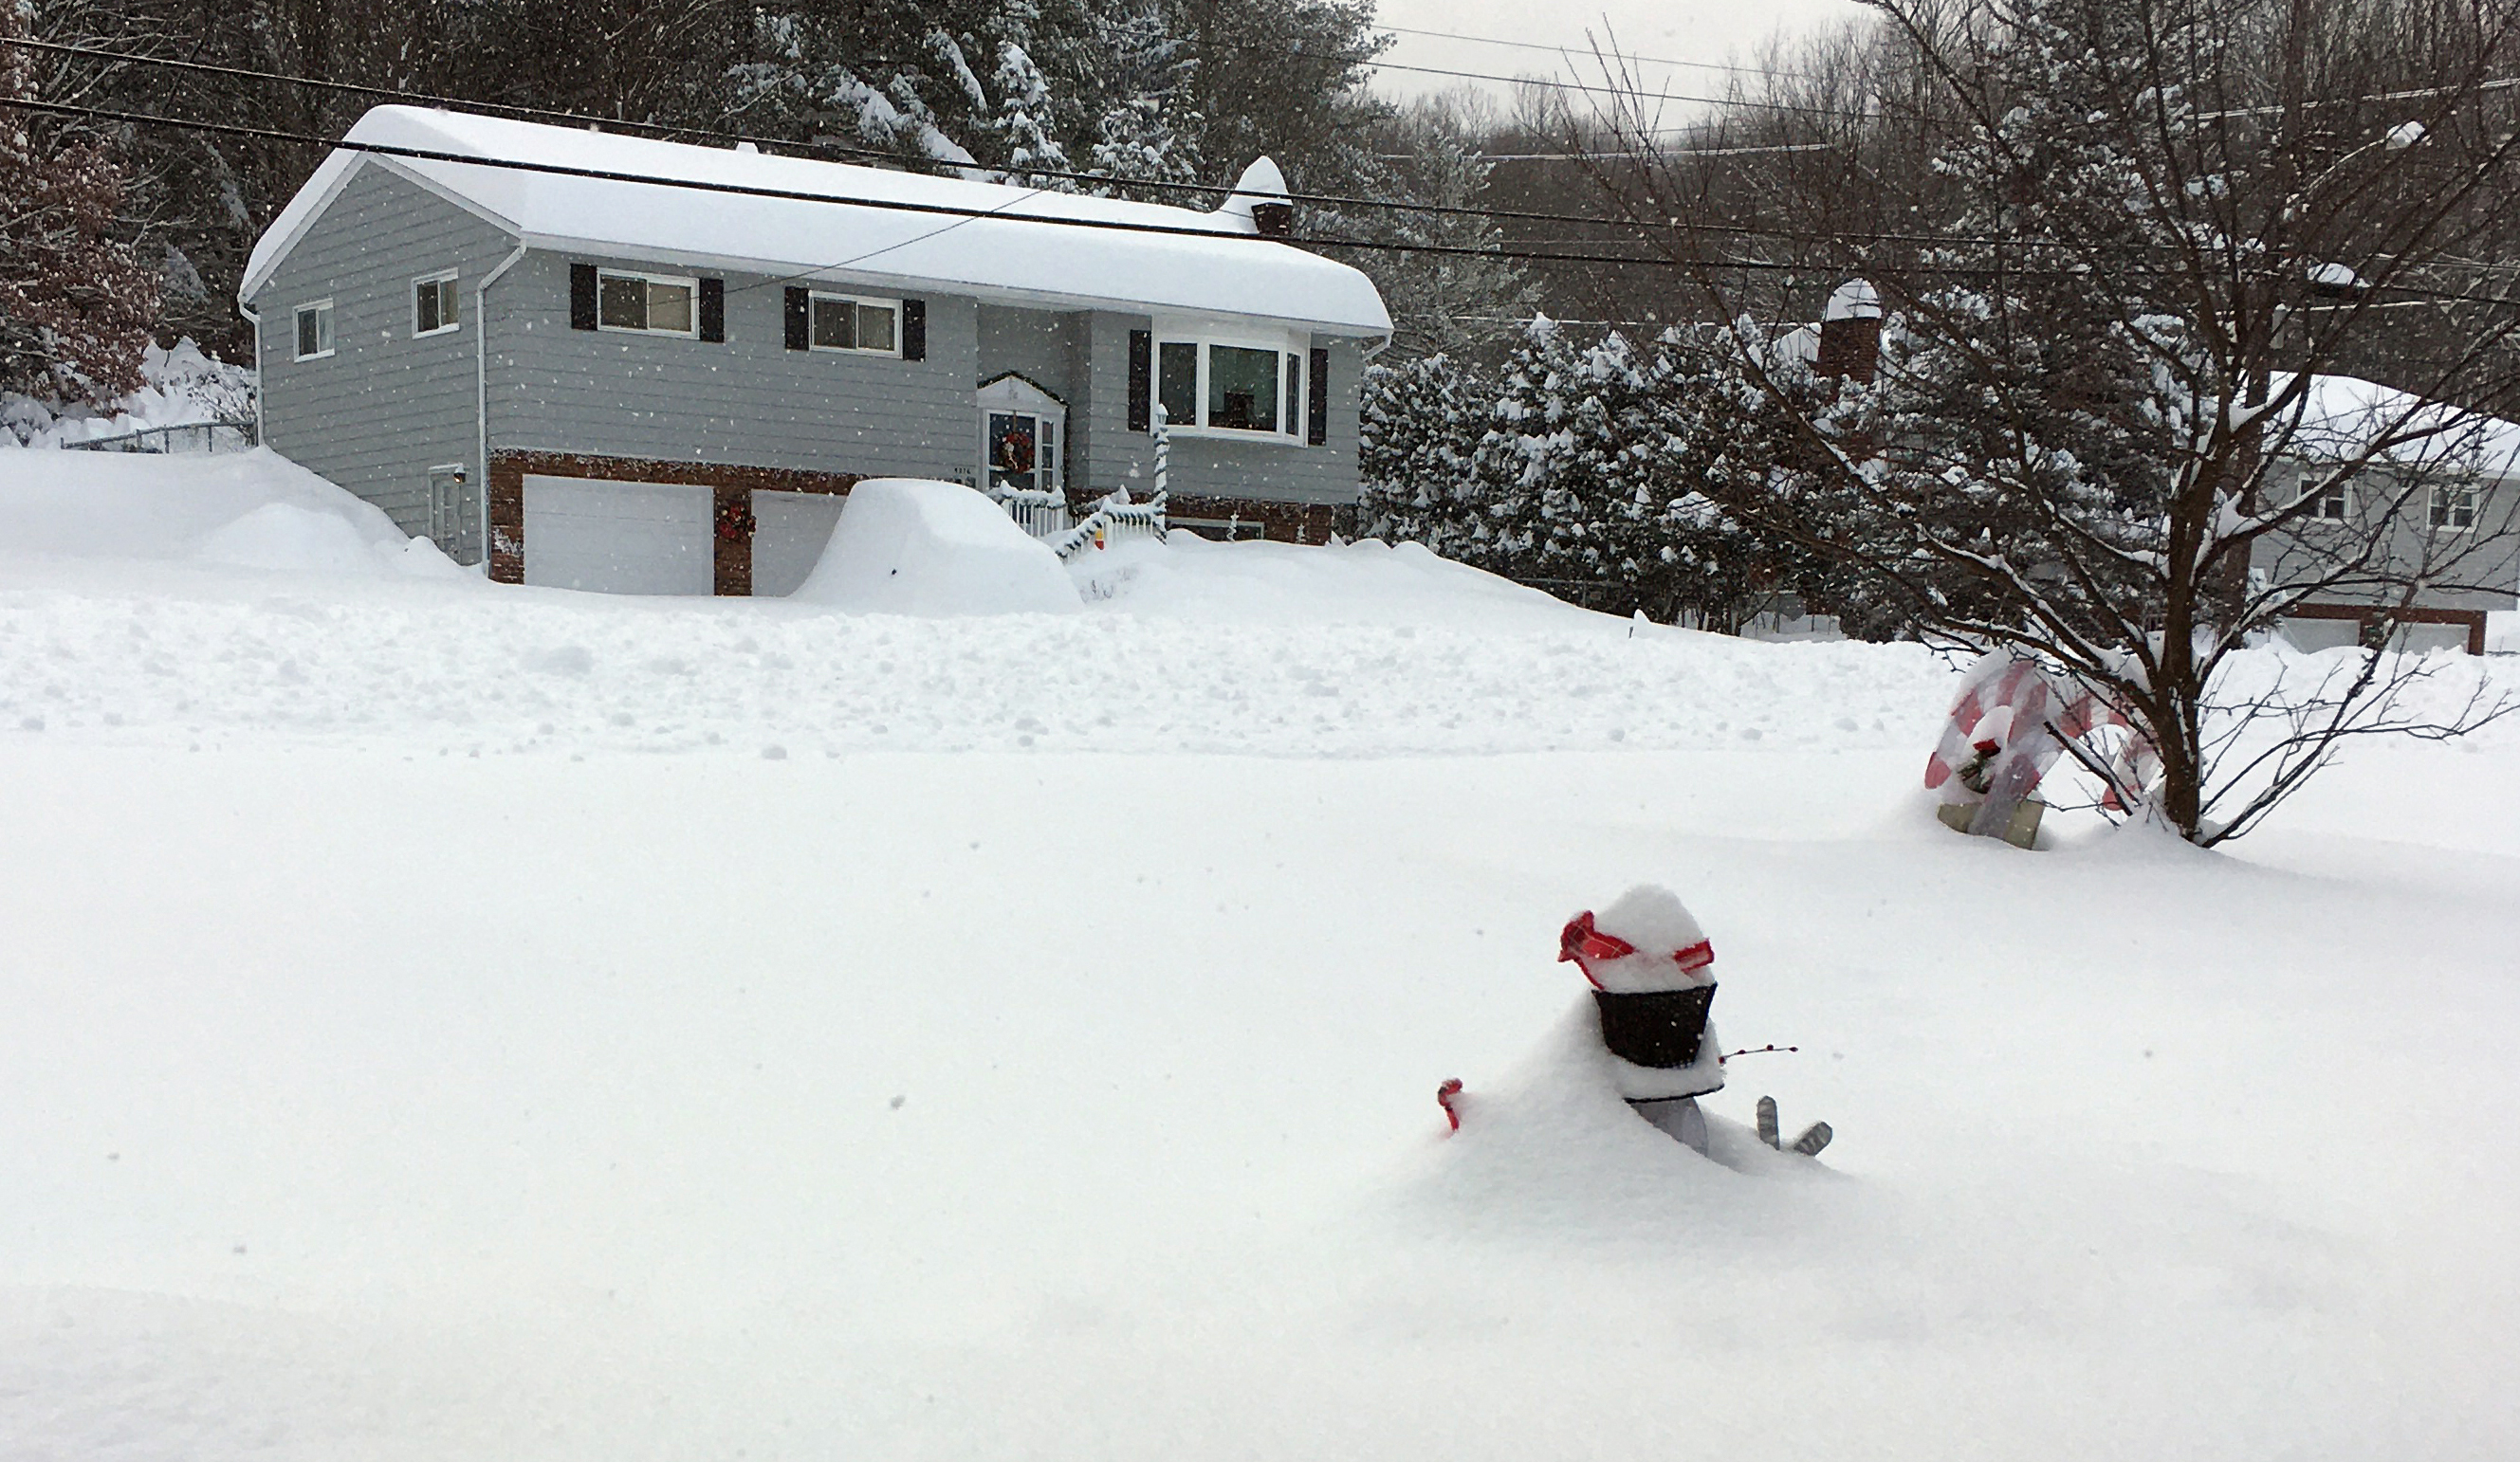 PHOTOS: Record snowstorm buries parts of upstate New York under 6